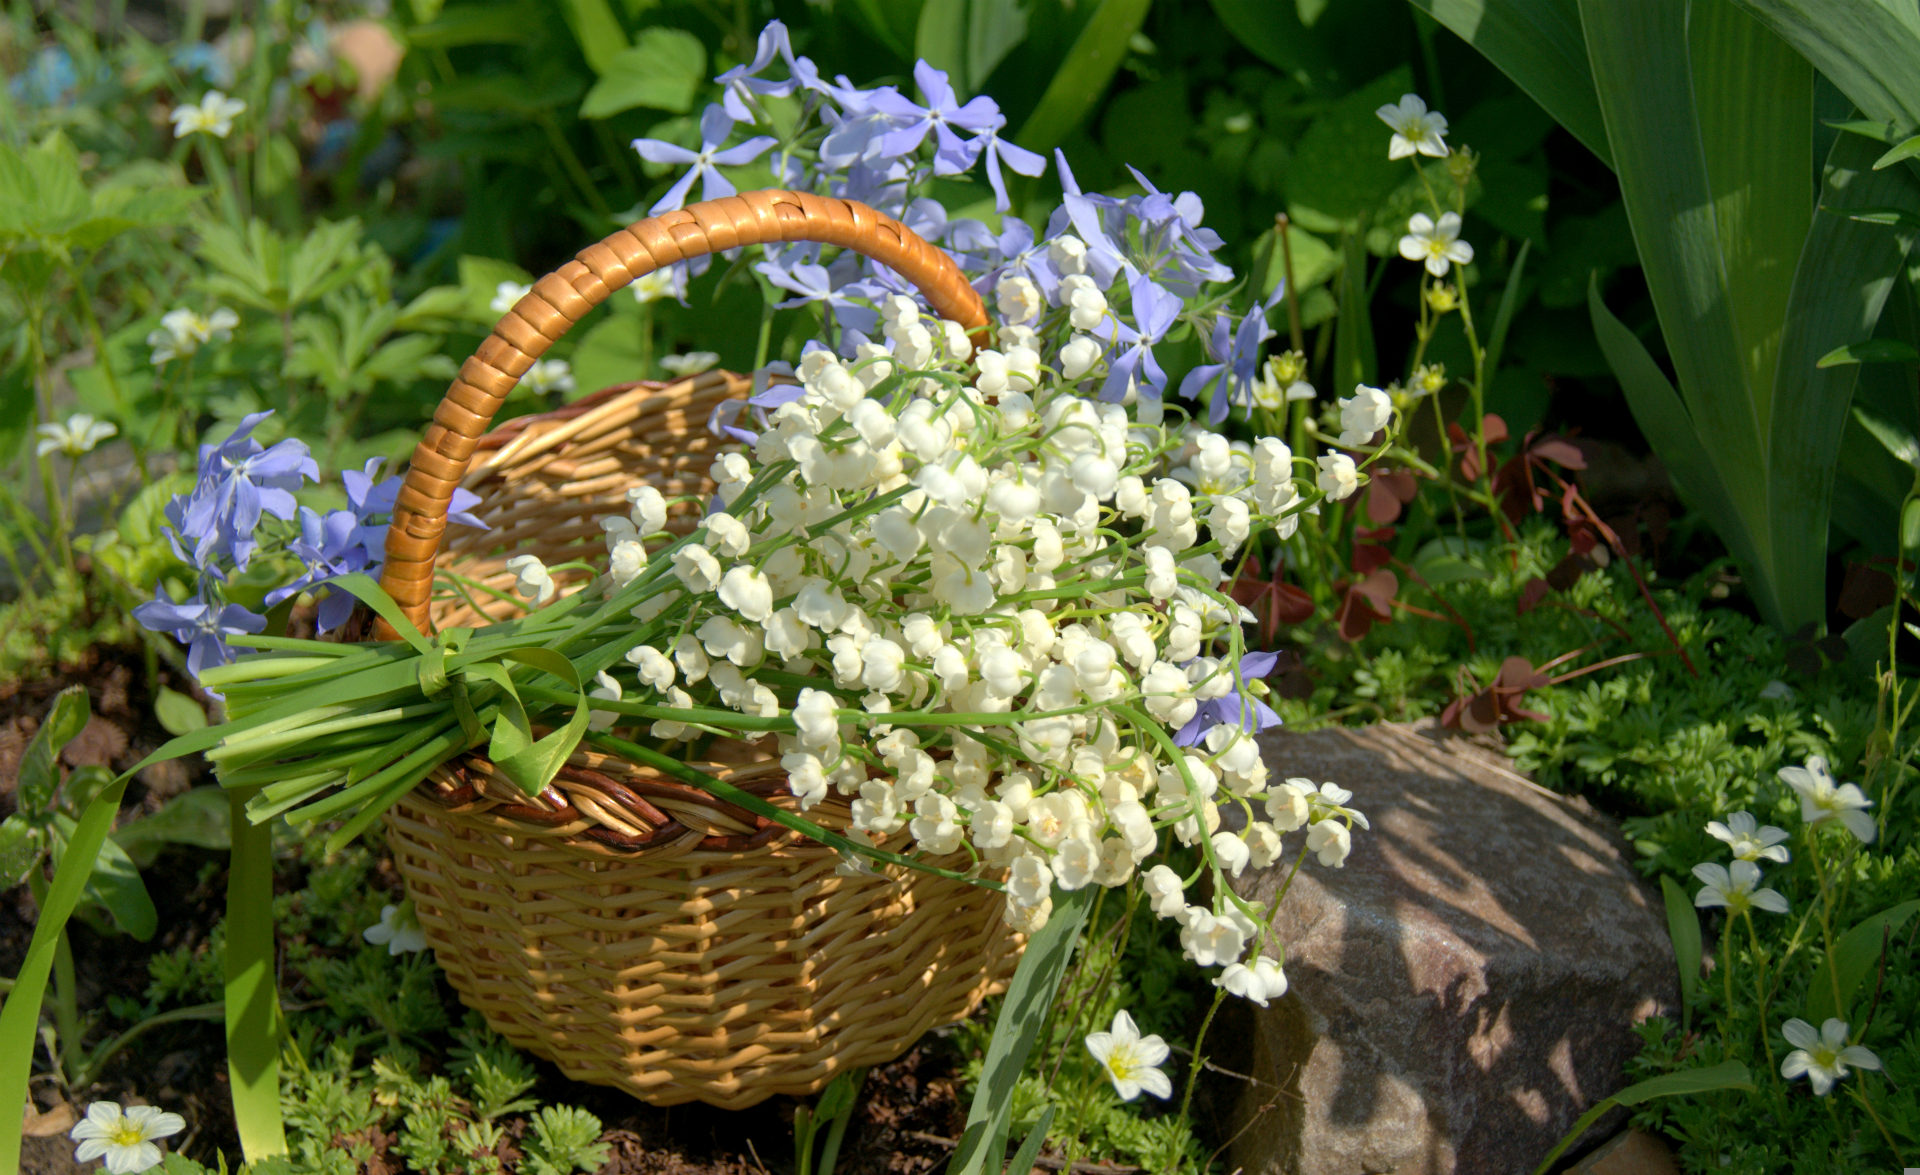 lily of the valley, earth, basket, flower, white flower, flowers